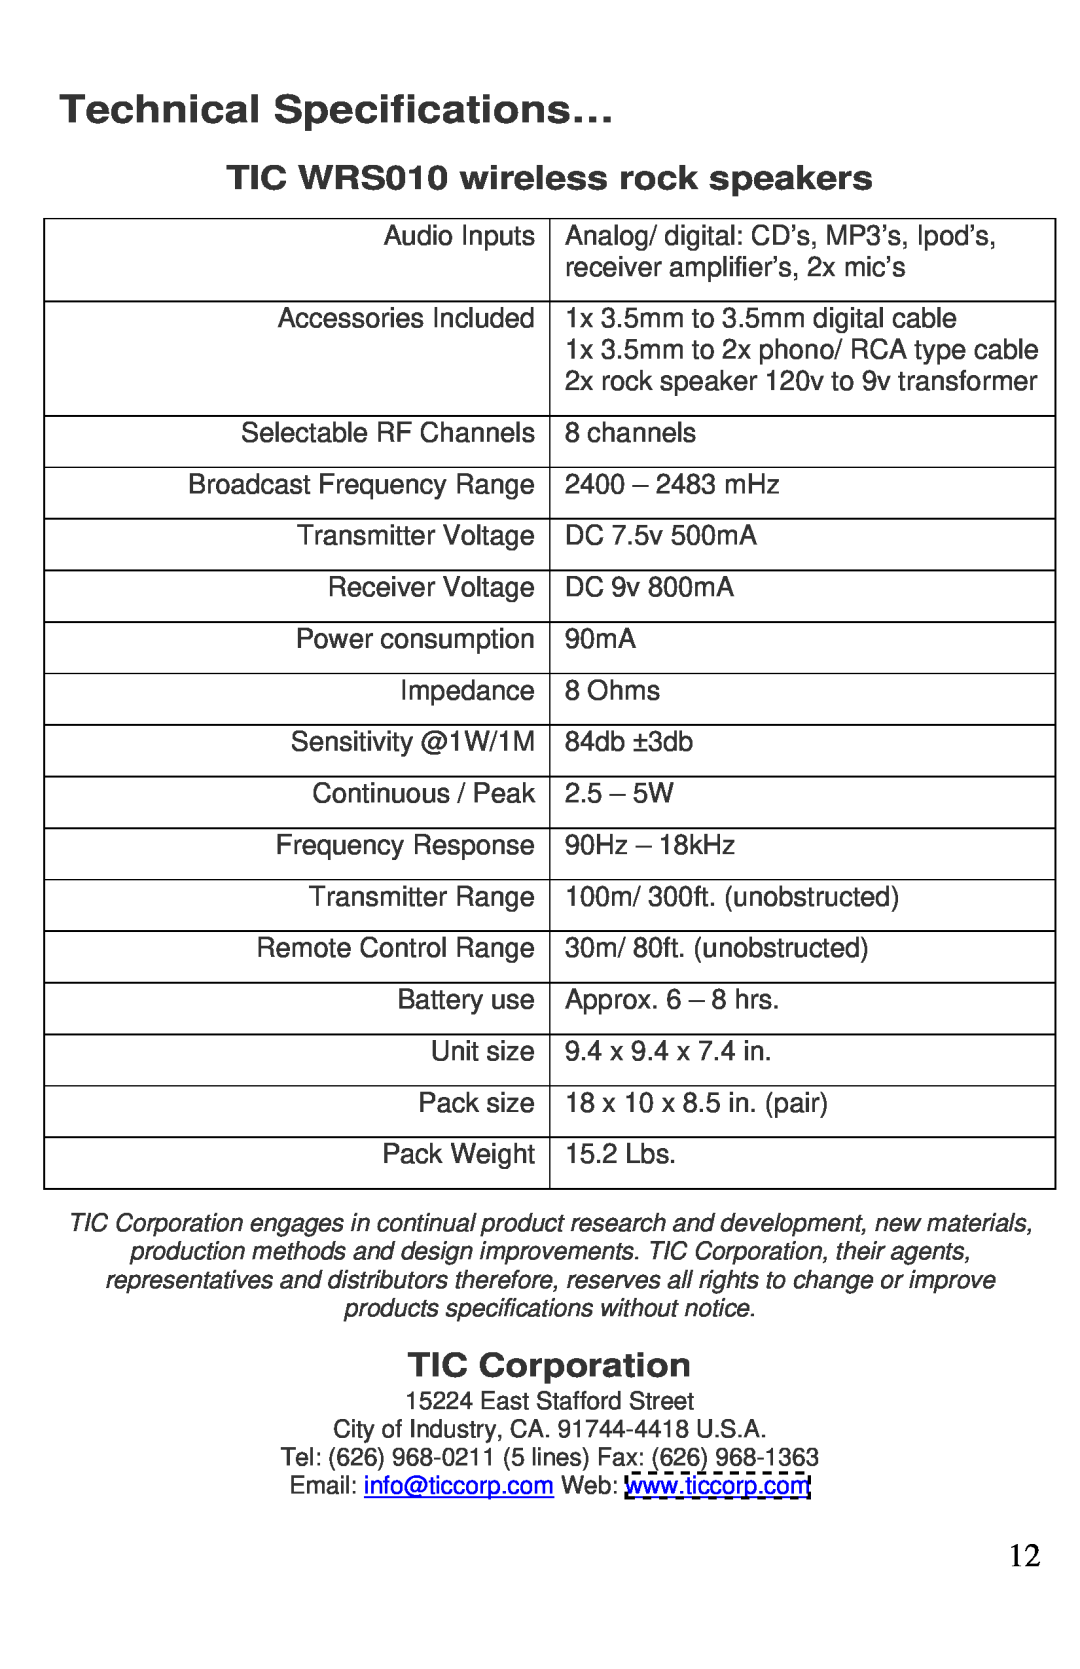 TIC manual Technical Specifications…, TIC WRS010 wireless rock speakers, TIC Corporation 